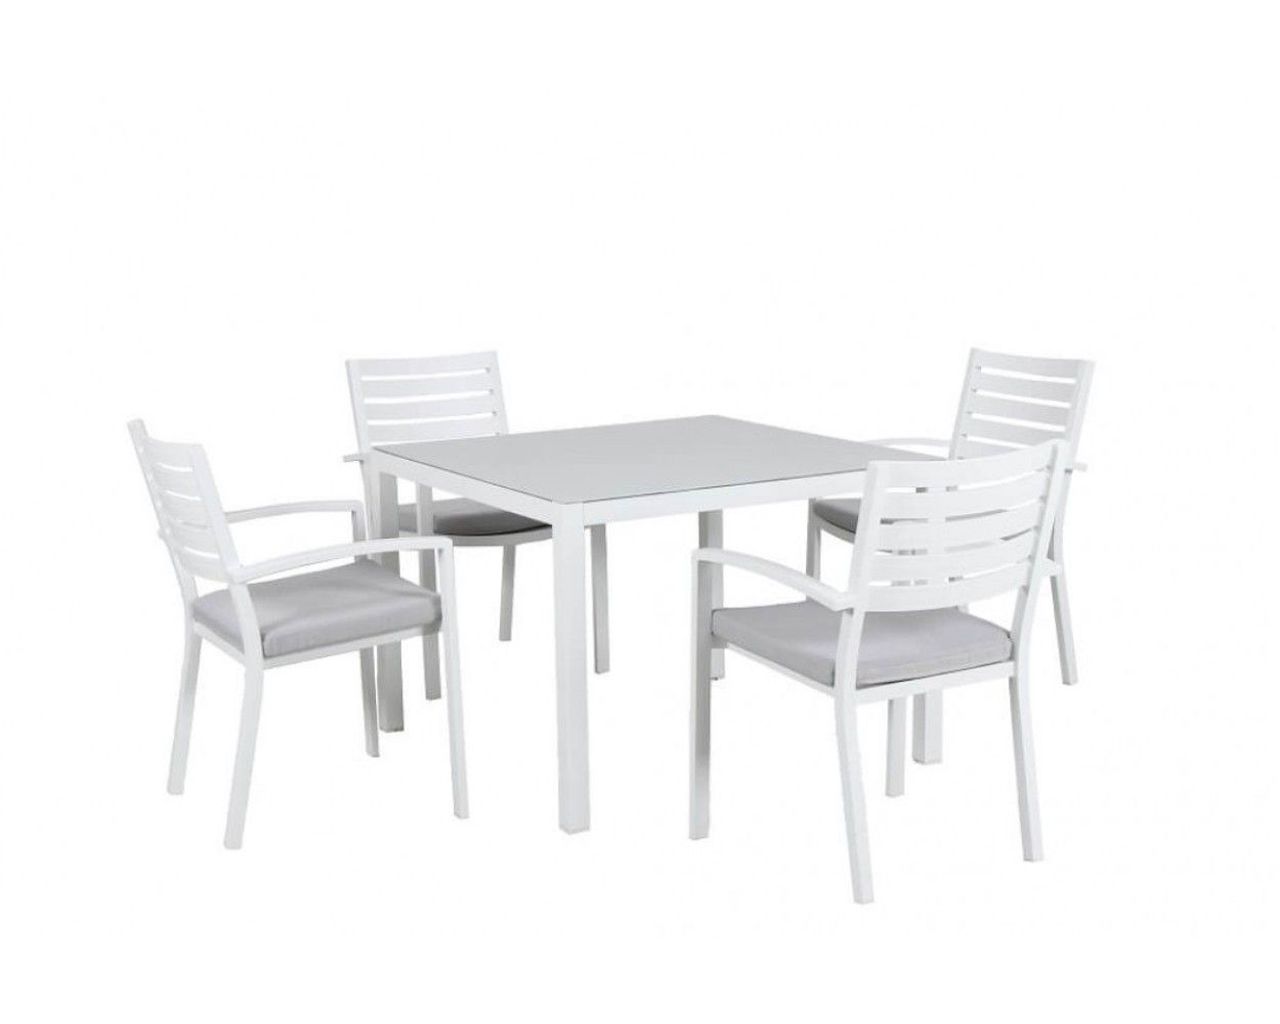 Boston 5 Piece Slatted Dining, White, small-swatch